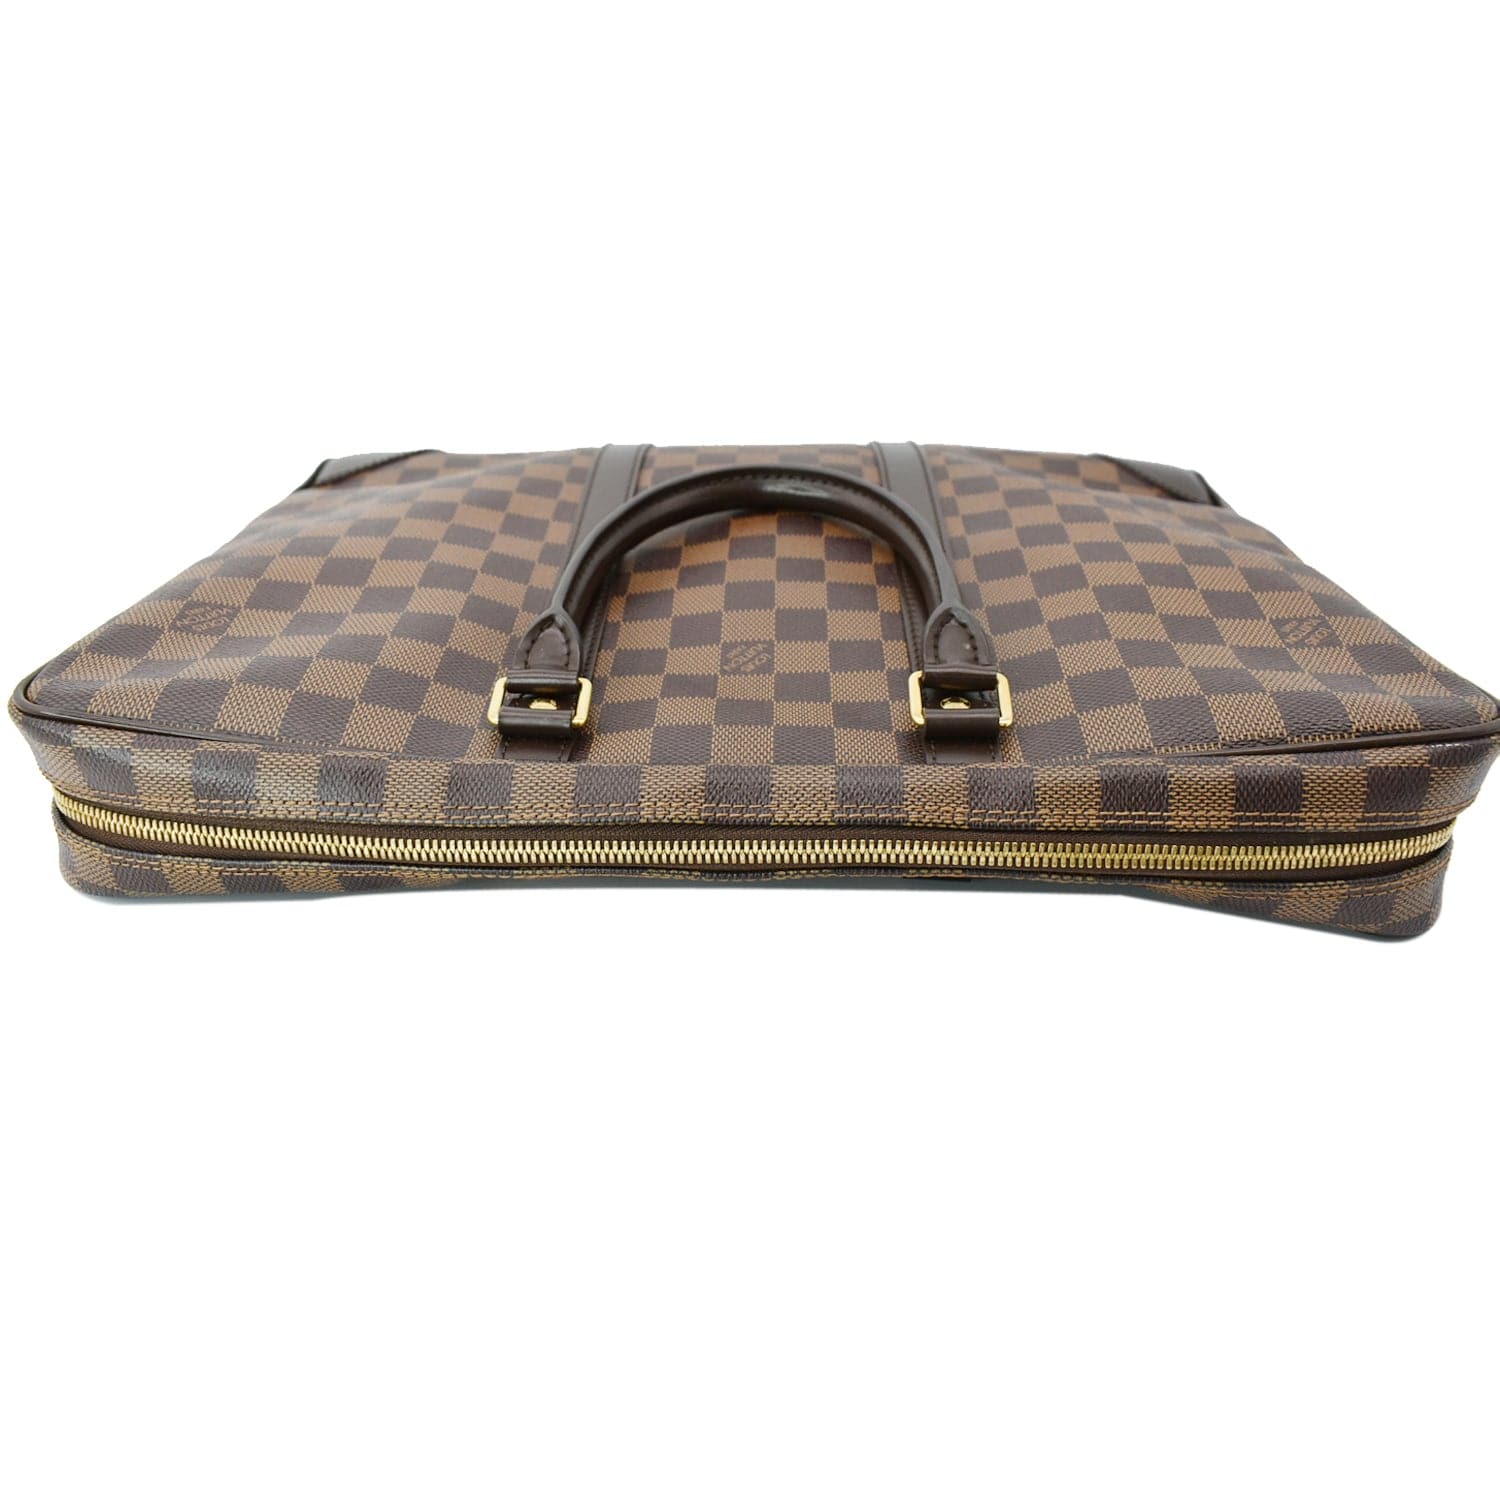 Louis Vuitton - Authenticated Pochette Voyage Small Bag - Leather Brown Plain for Men, Very Good Condition